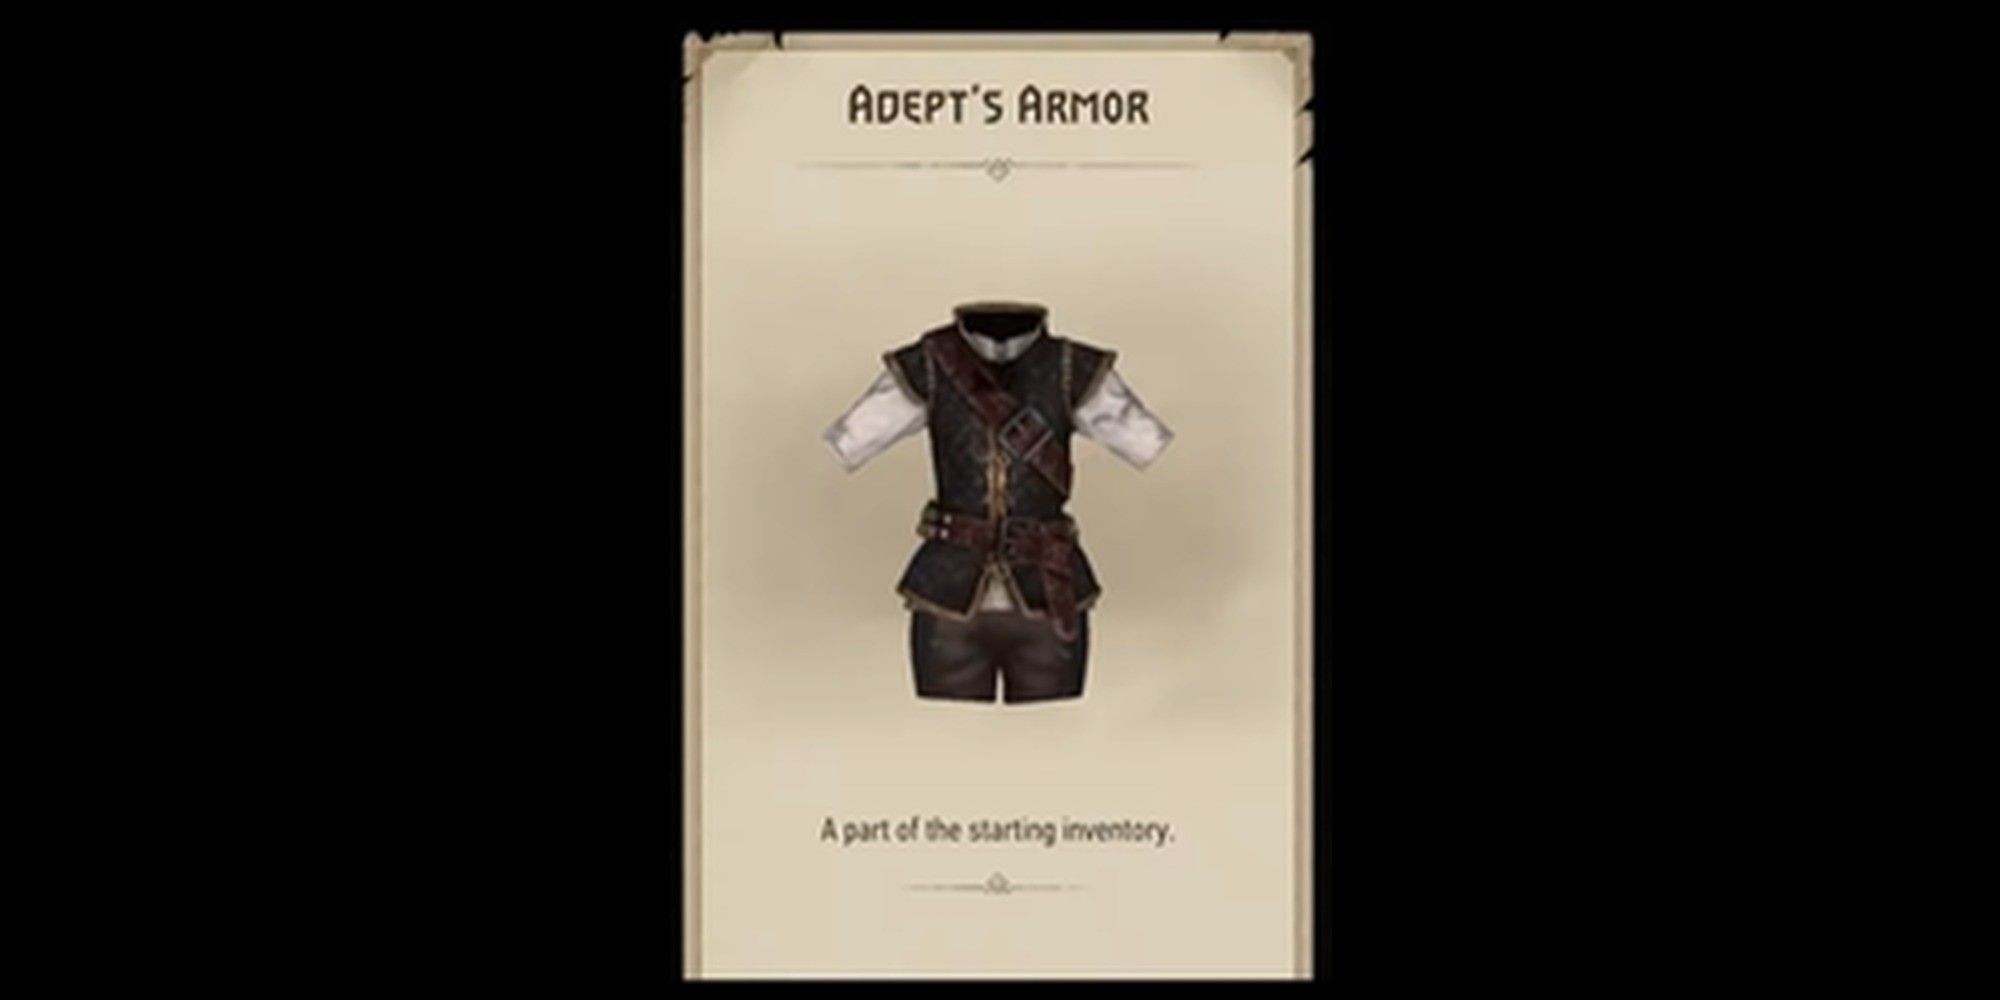 The adept's armor from The Witcher Monster slayer